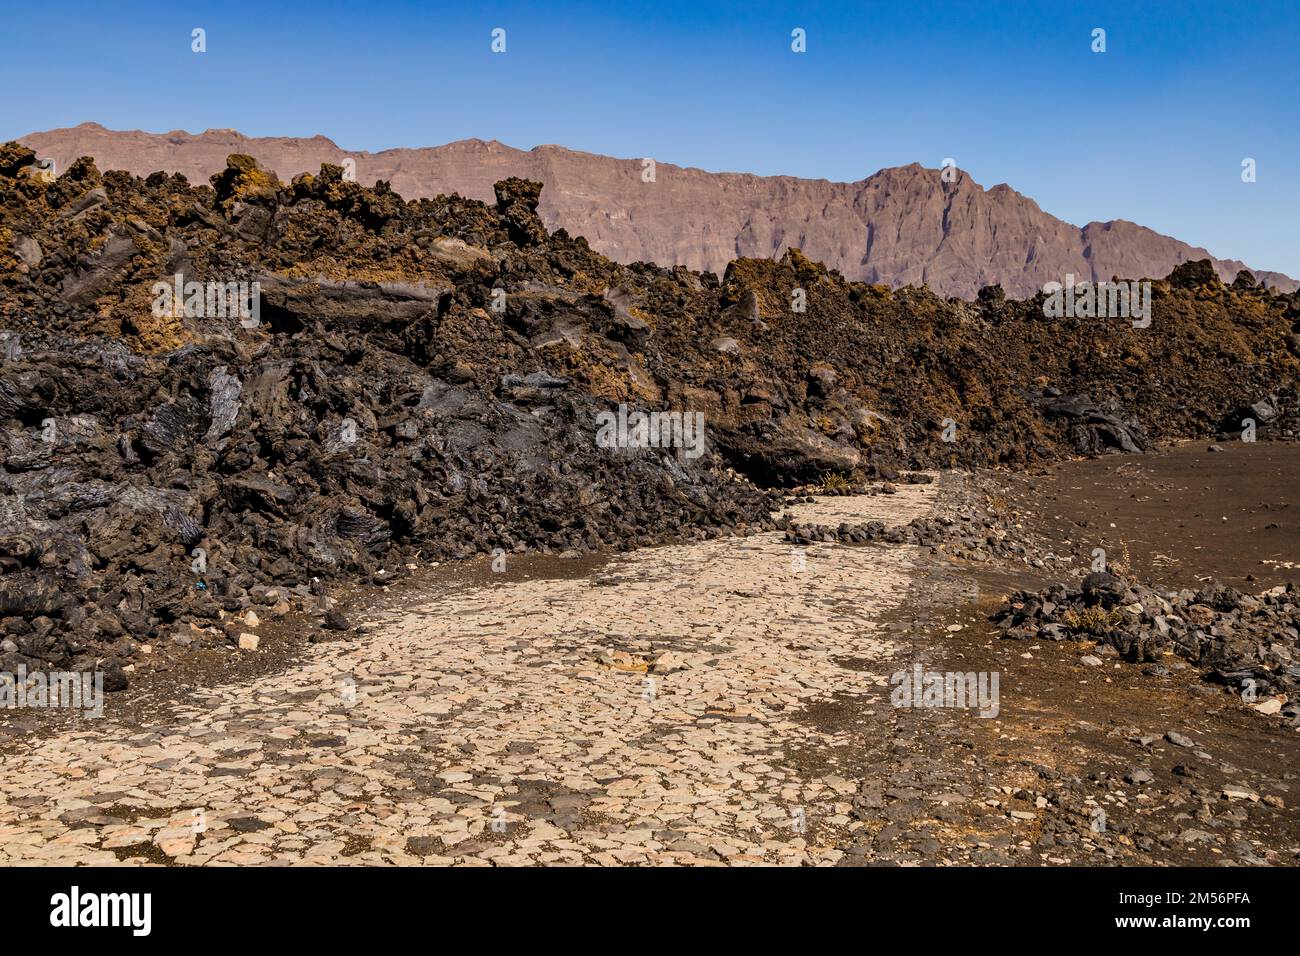 An eruption of the volcano Pico do Fogo in Cape Verde has made the road through the crater impassable, volcanic eruption on the island of Fogo Stock Photo